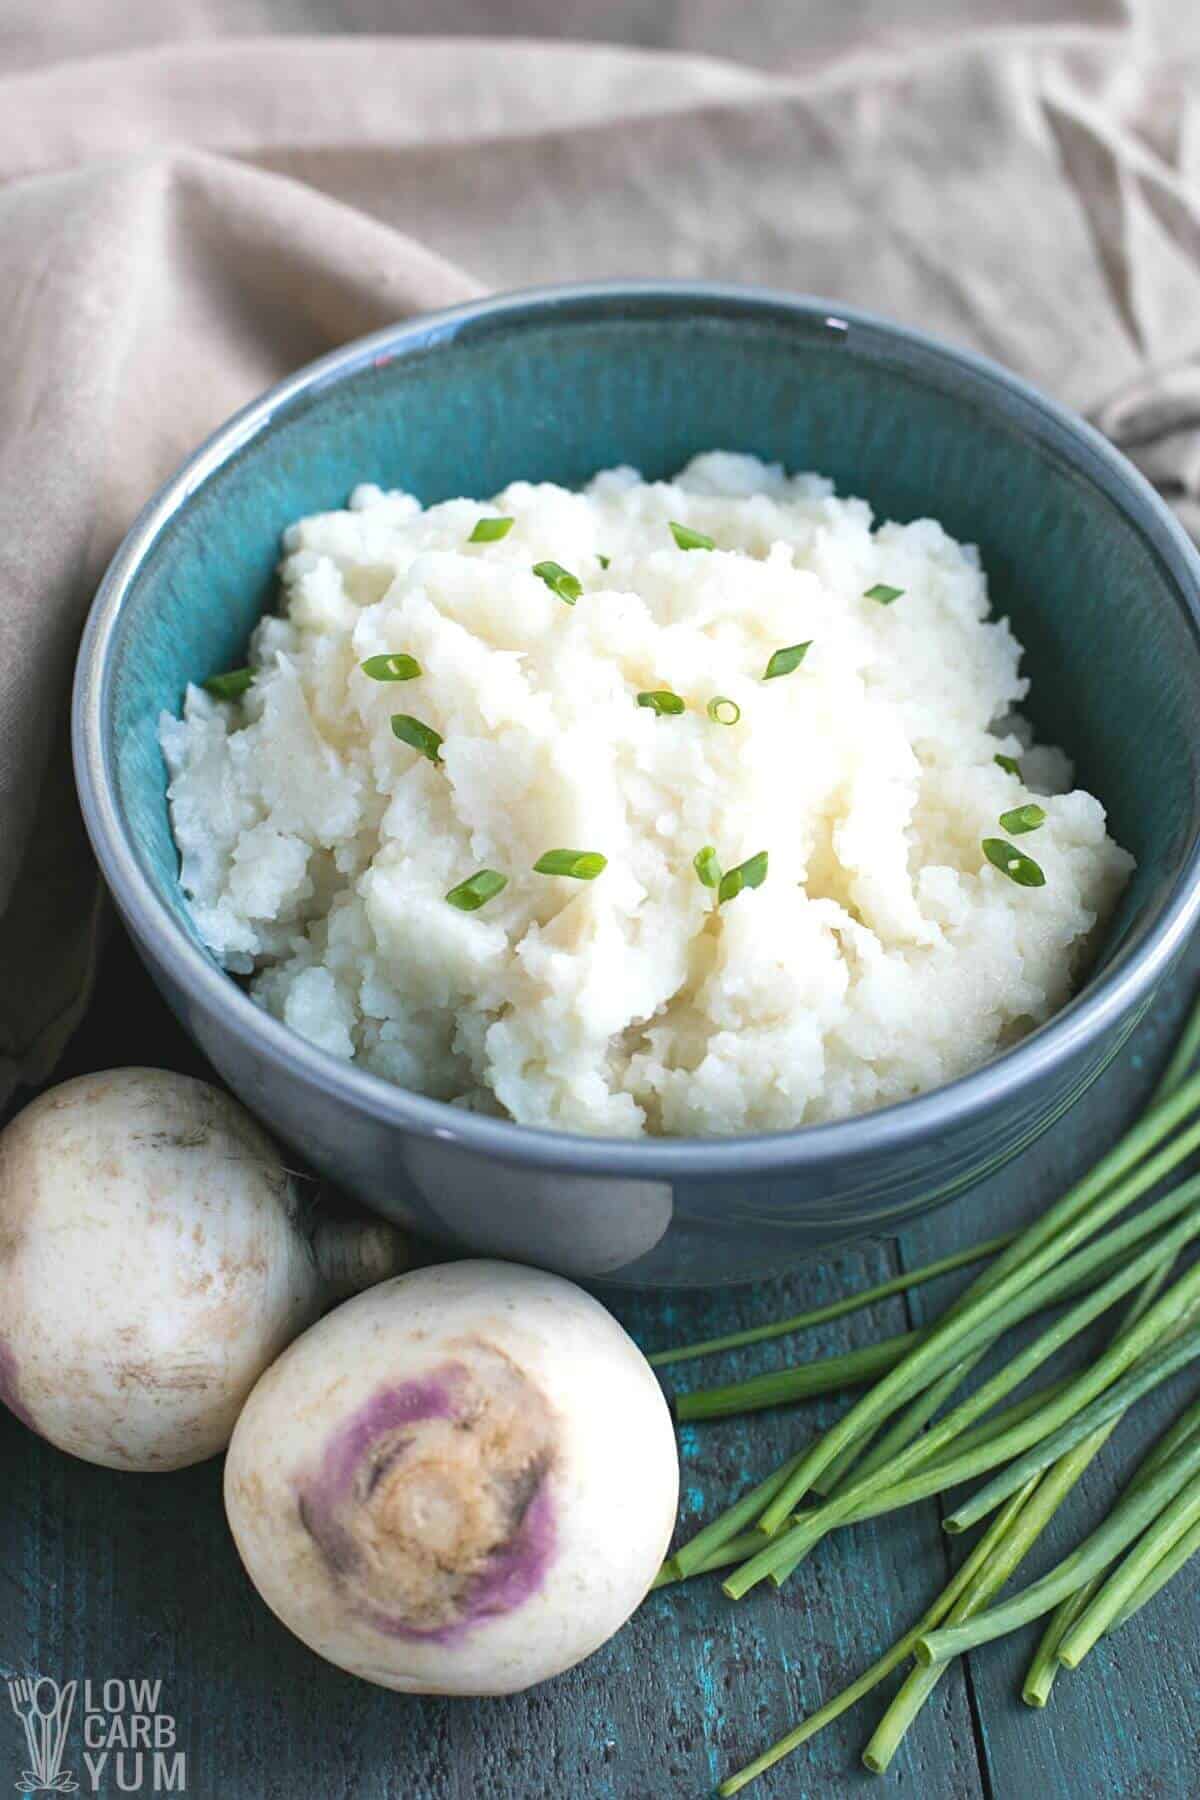 mashed turnips with chives and turnips.